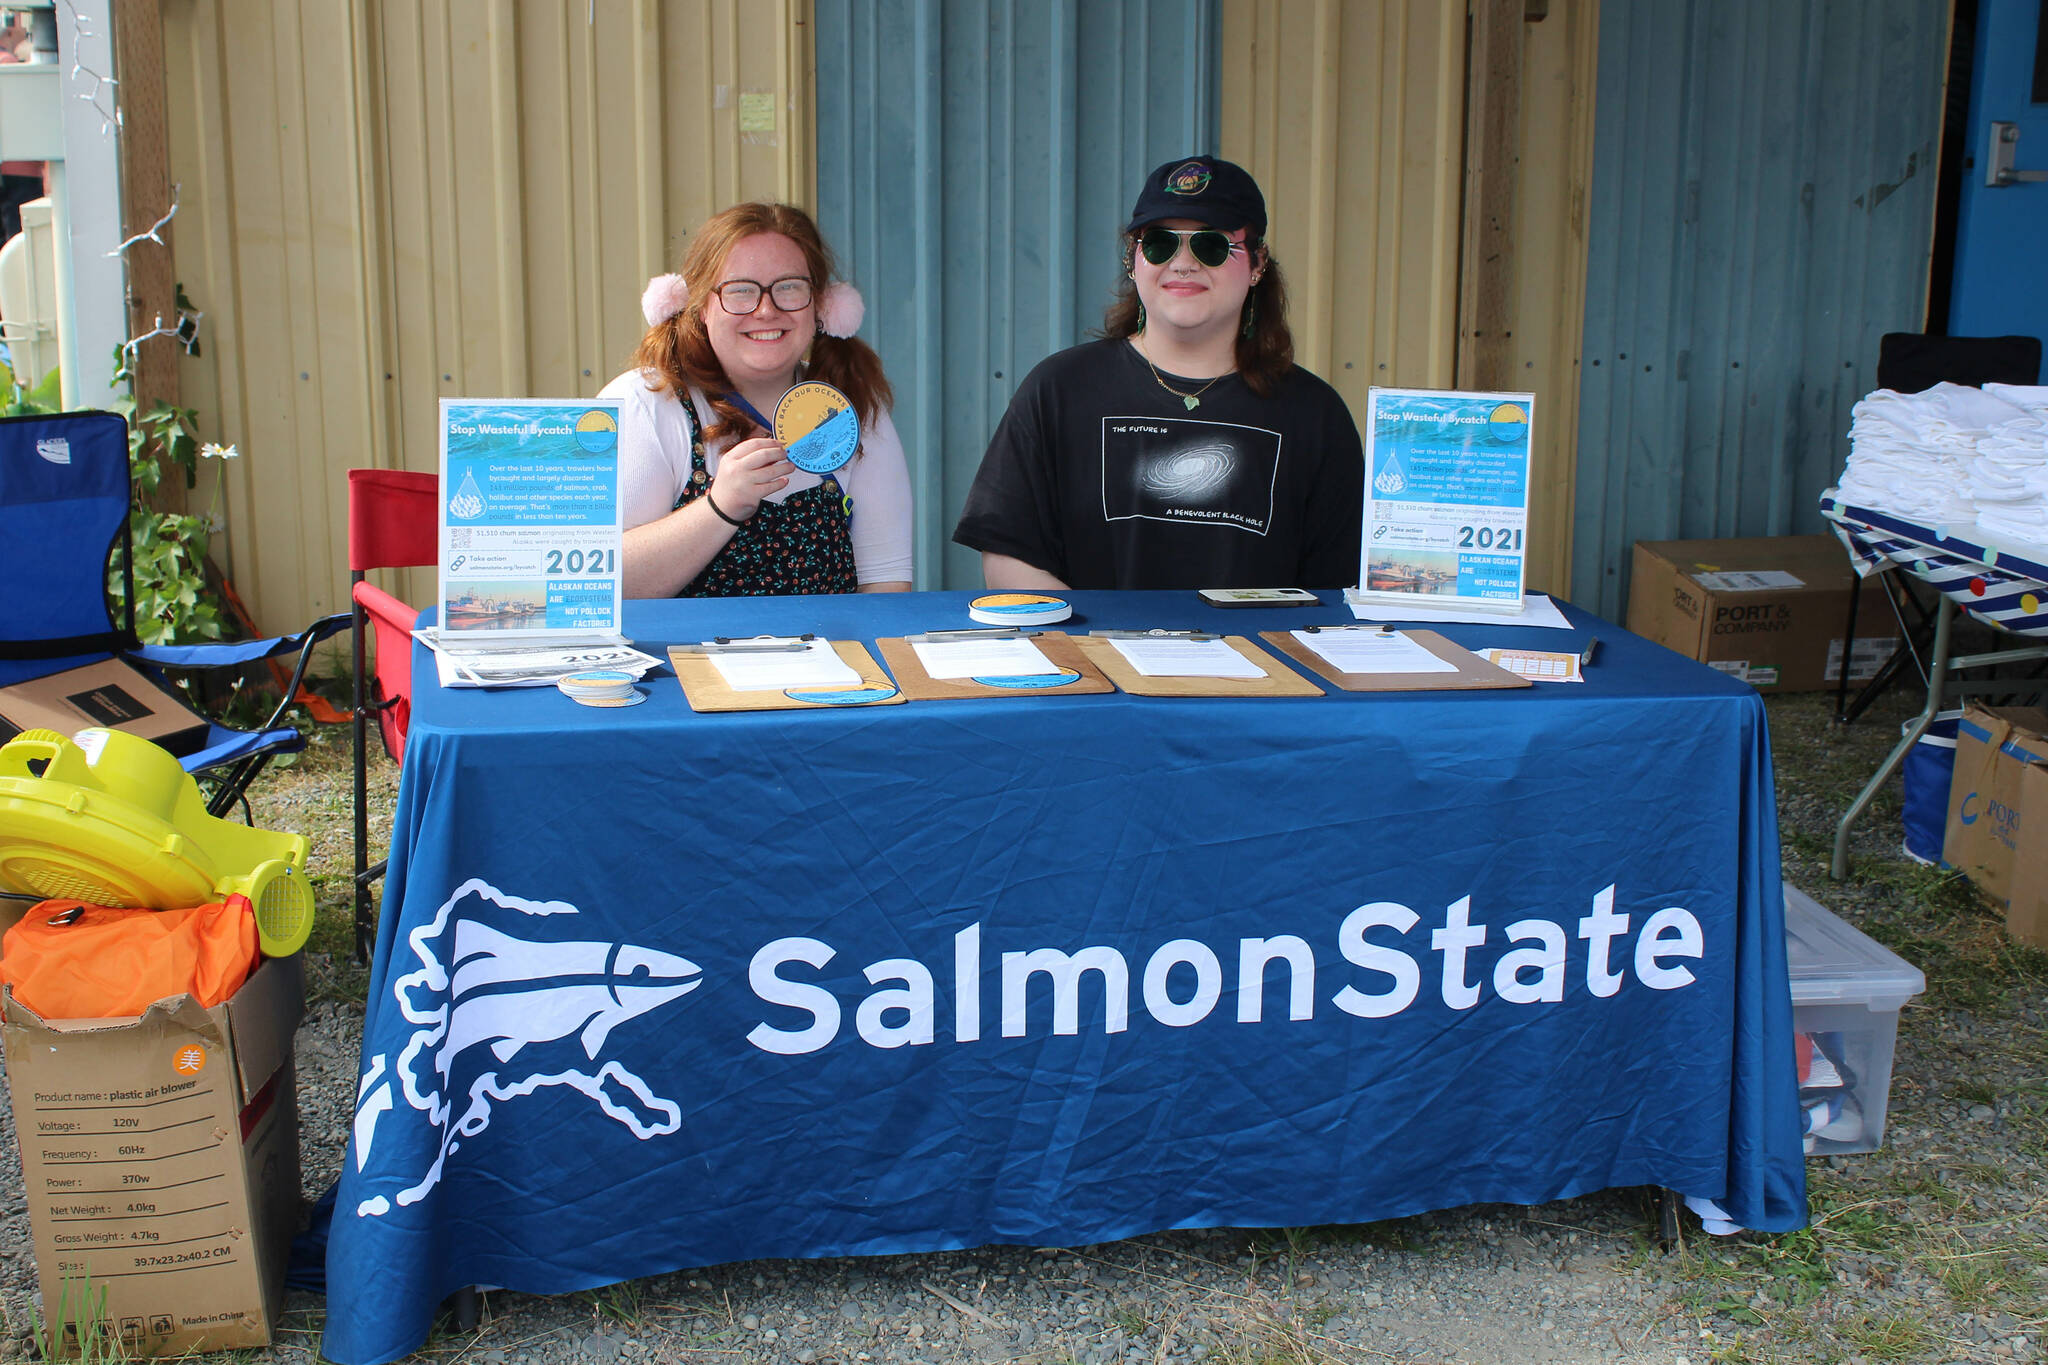 Teresa Wrobel (left) and Allison Dill (right) raise awareness about trawler bycatch at a booth at Salmonfest on Friday, Aug. 4, 2023 in Ninilchik, Alaska. (Ashlyn O’Hara/Peninsula Clarion)